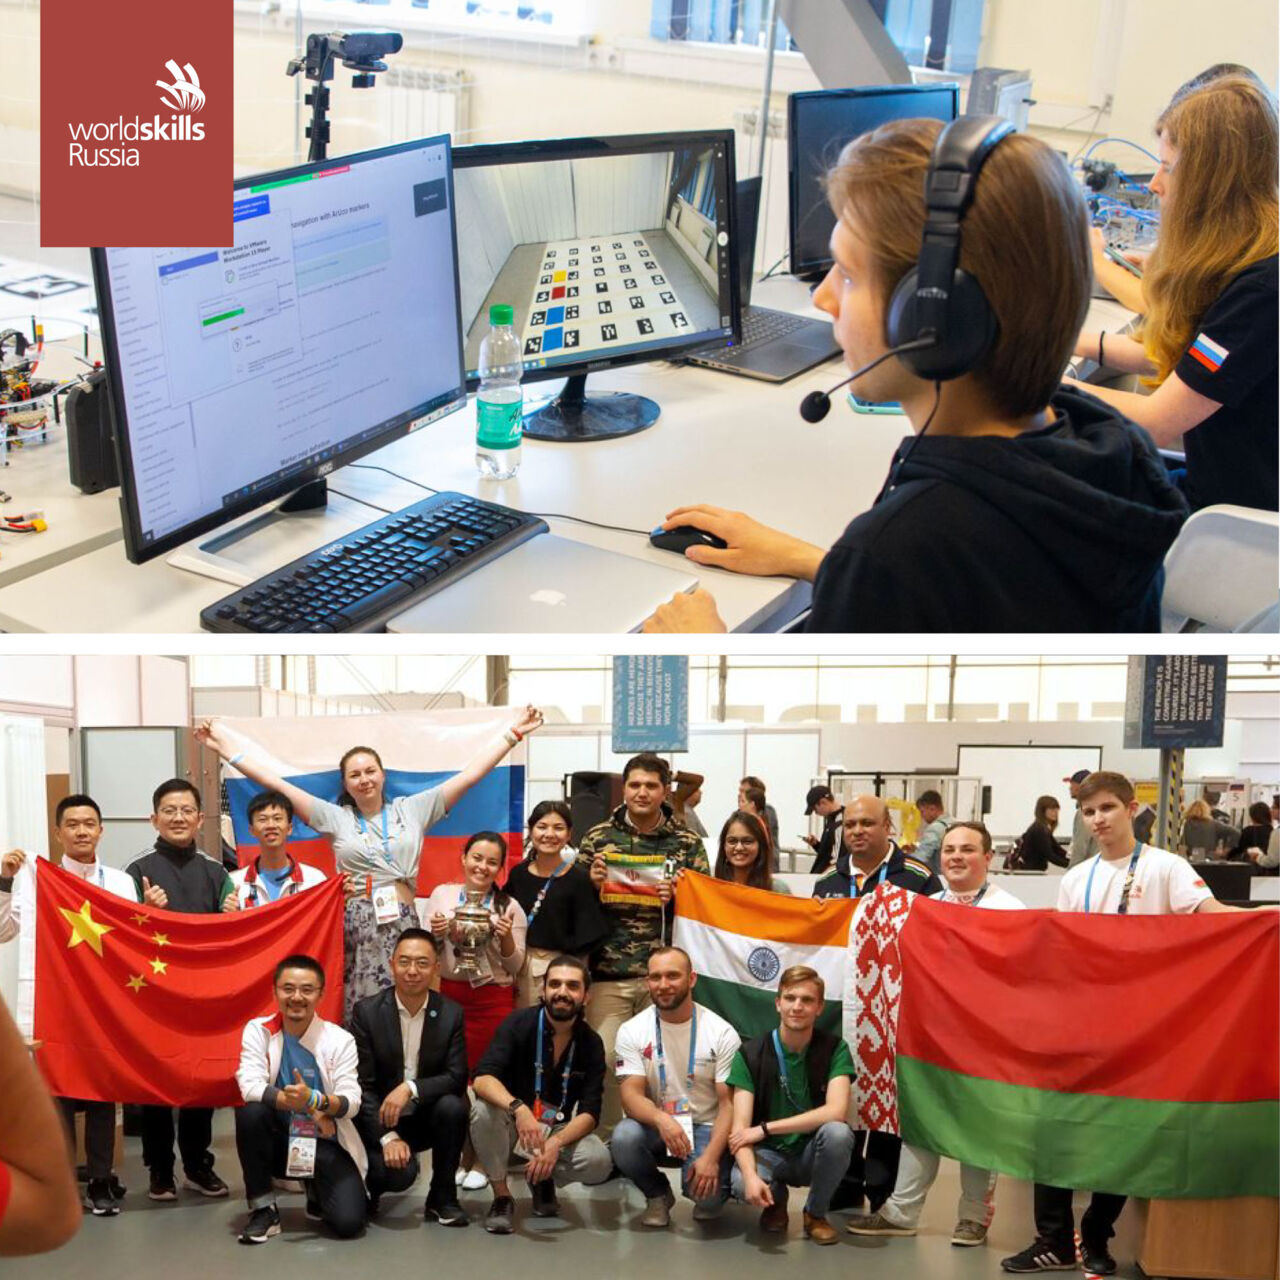 A collage of two images showing activities and participants at the WorldSkill Russia’s Capacity Building Centre.